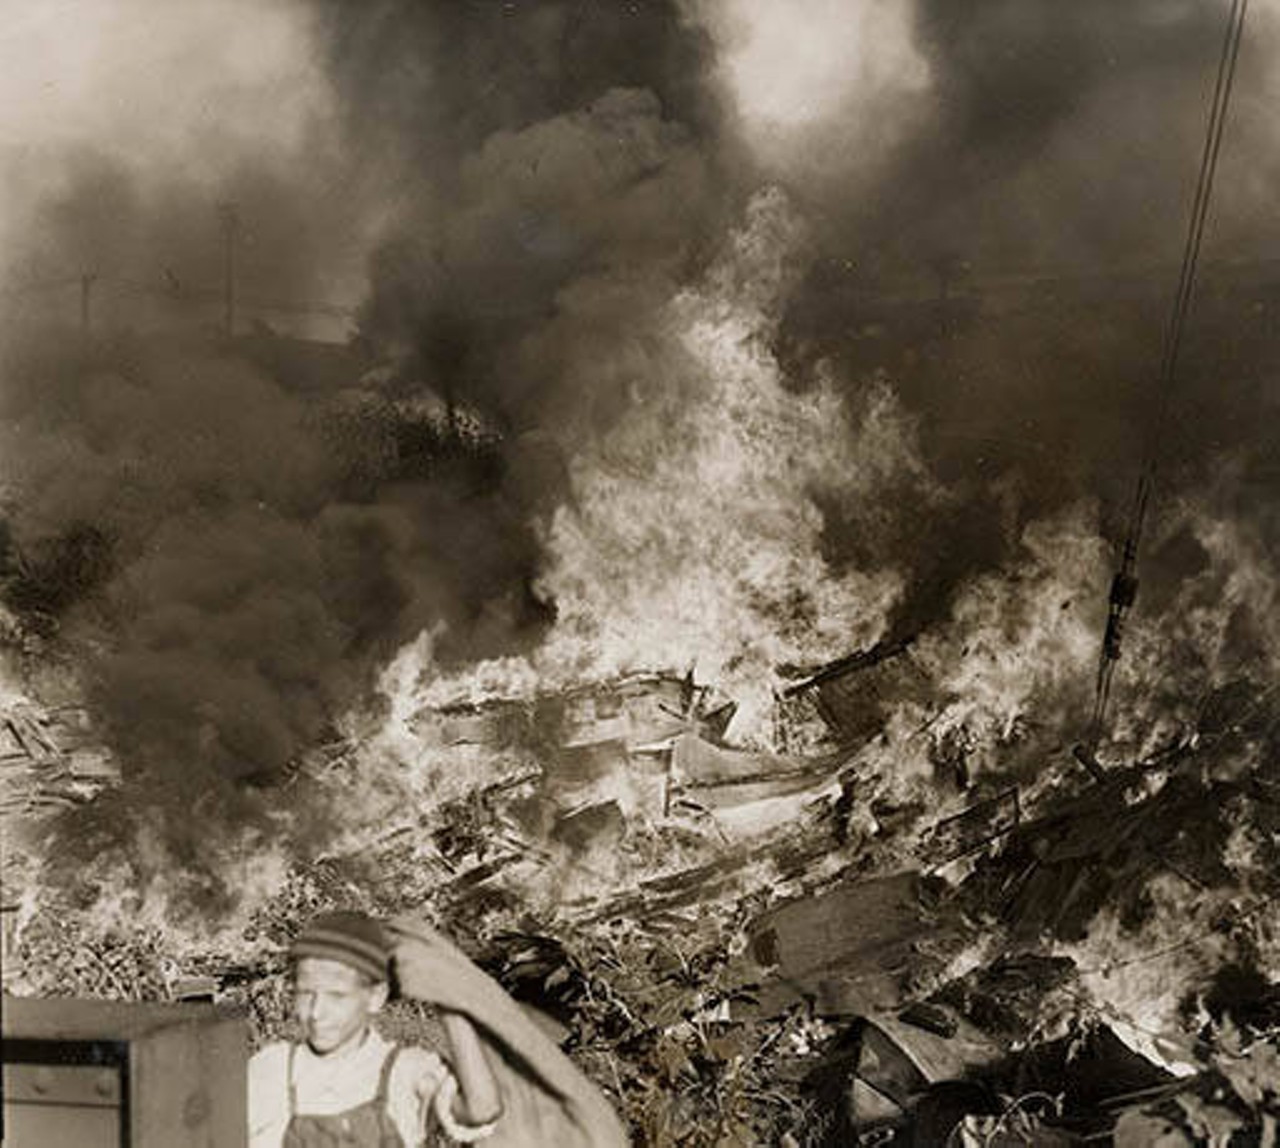 Buring down the shantyville in Kingsbury Run on August 18, 1938 was mandated by then safety director Elliot Ness in an effort to rid the area of potential torso murder victims.